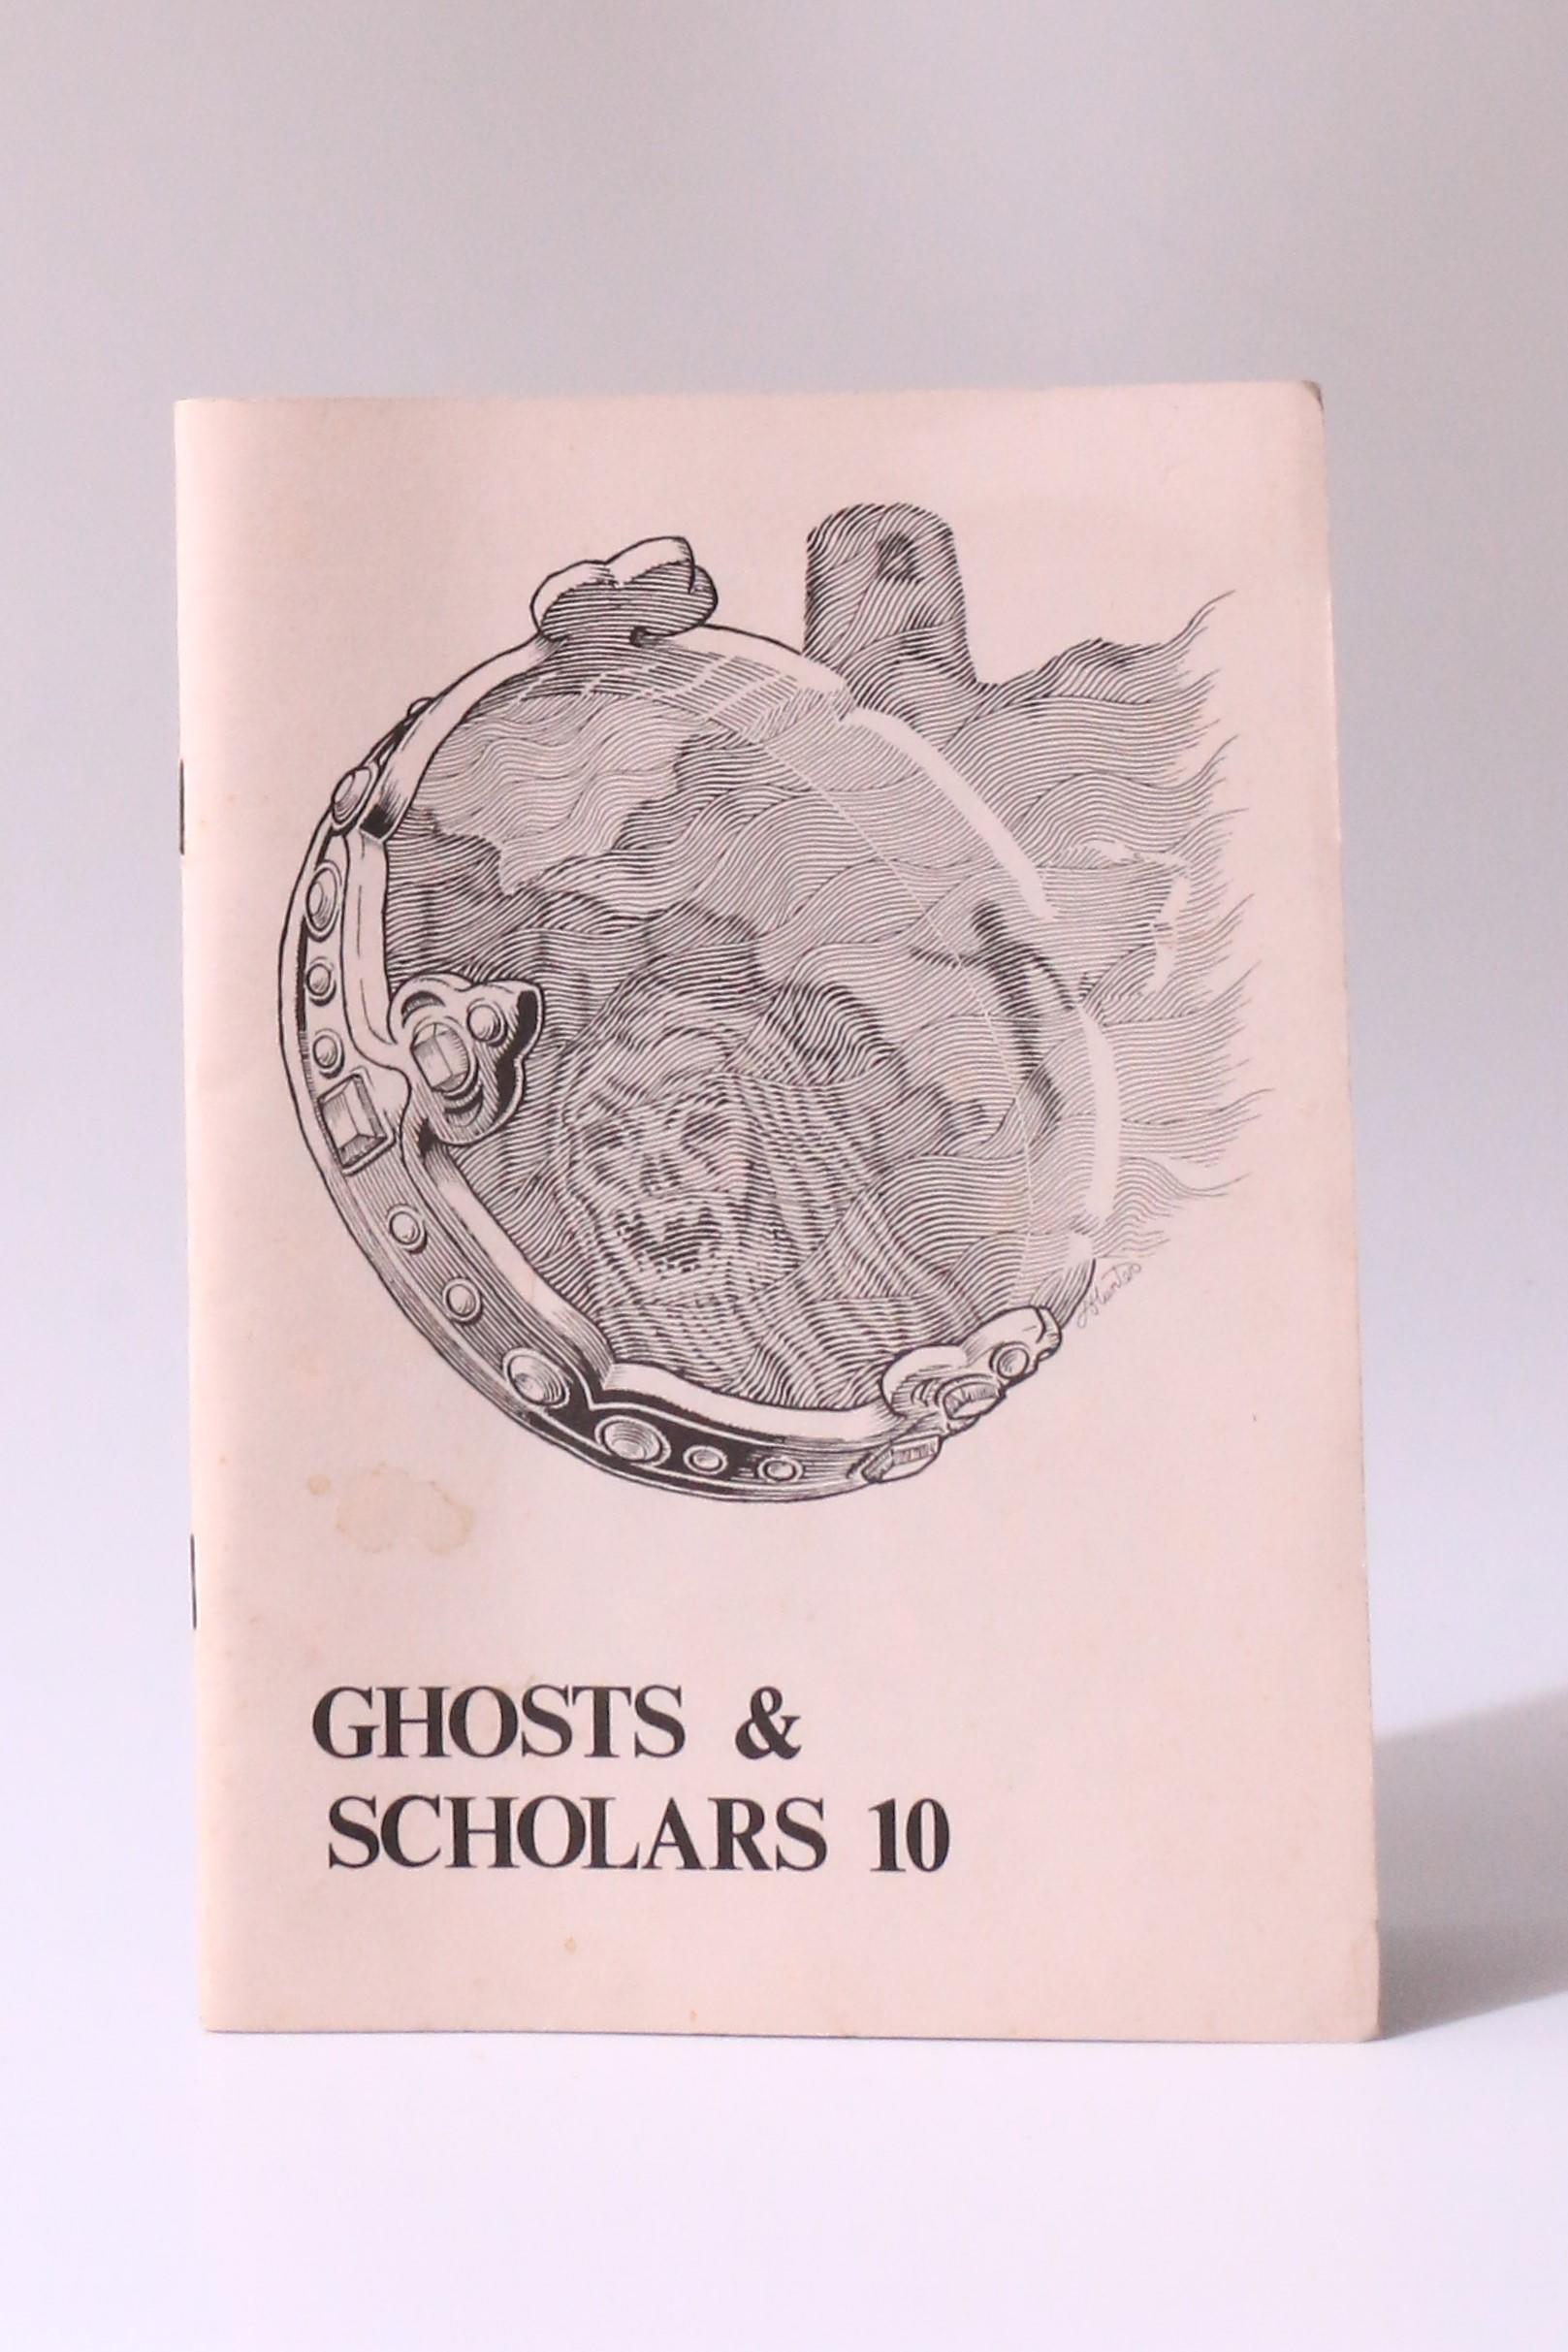 Rosemary Pardoe [ed] - Ghosts & Scholars 10 - Haunted Library, 1988, First Edition.